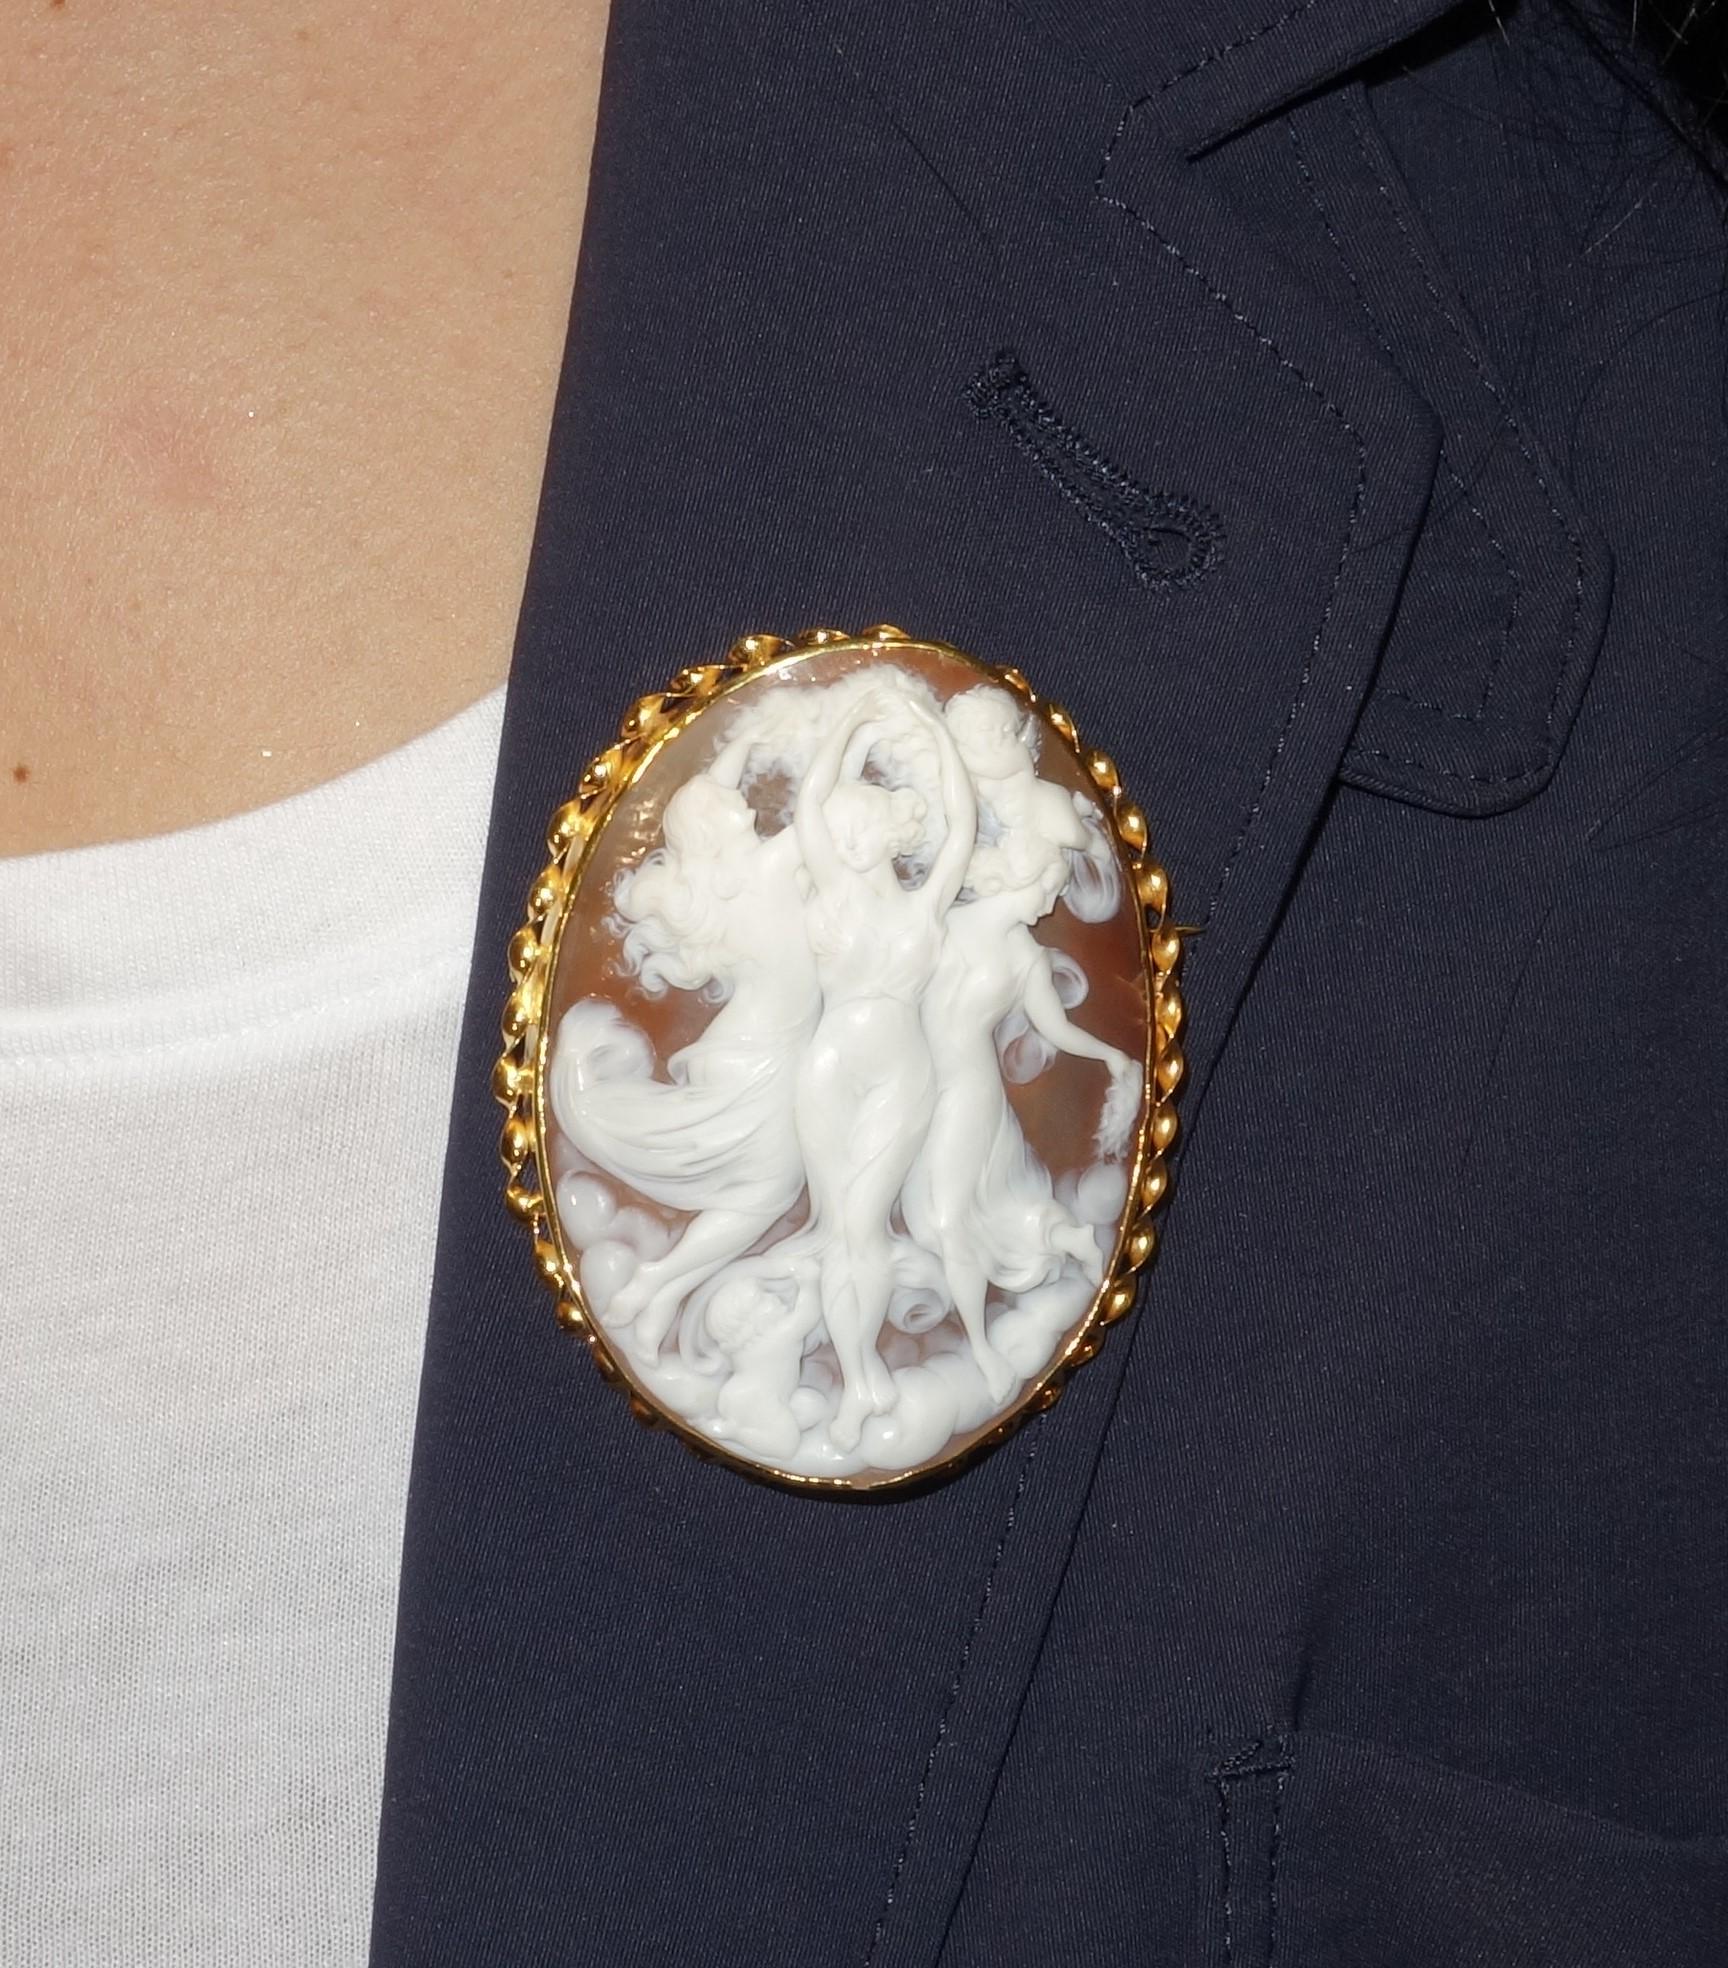 Elegant & Stylish Antique Cameo Brooch Pendant depicting The Three Graces; Beautifully Hand Carved in High Relief Estate piece; Meticulously artisan engraved with exquisite detail, this romantic natural carnelian shell cameo is set in a Beautiful